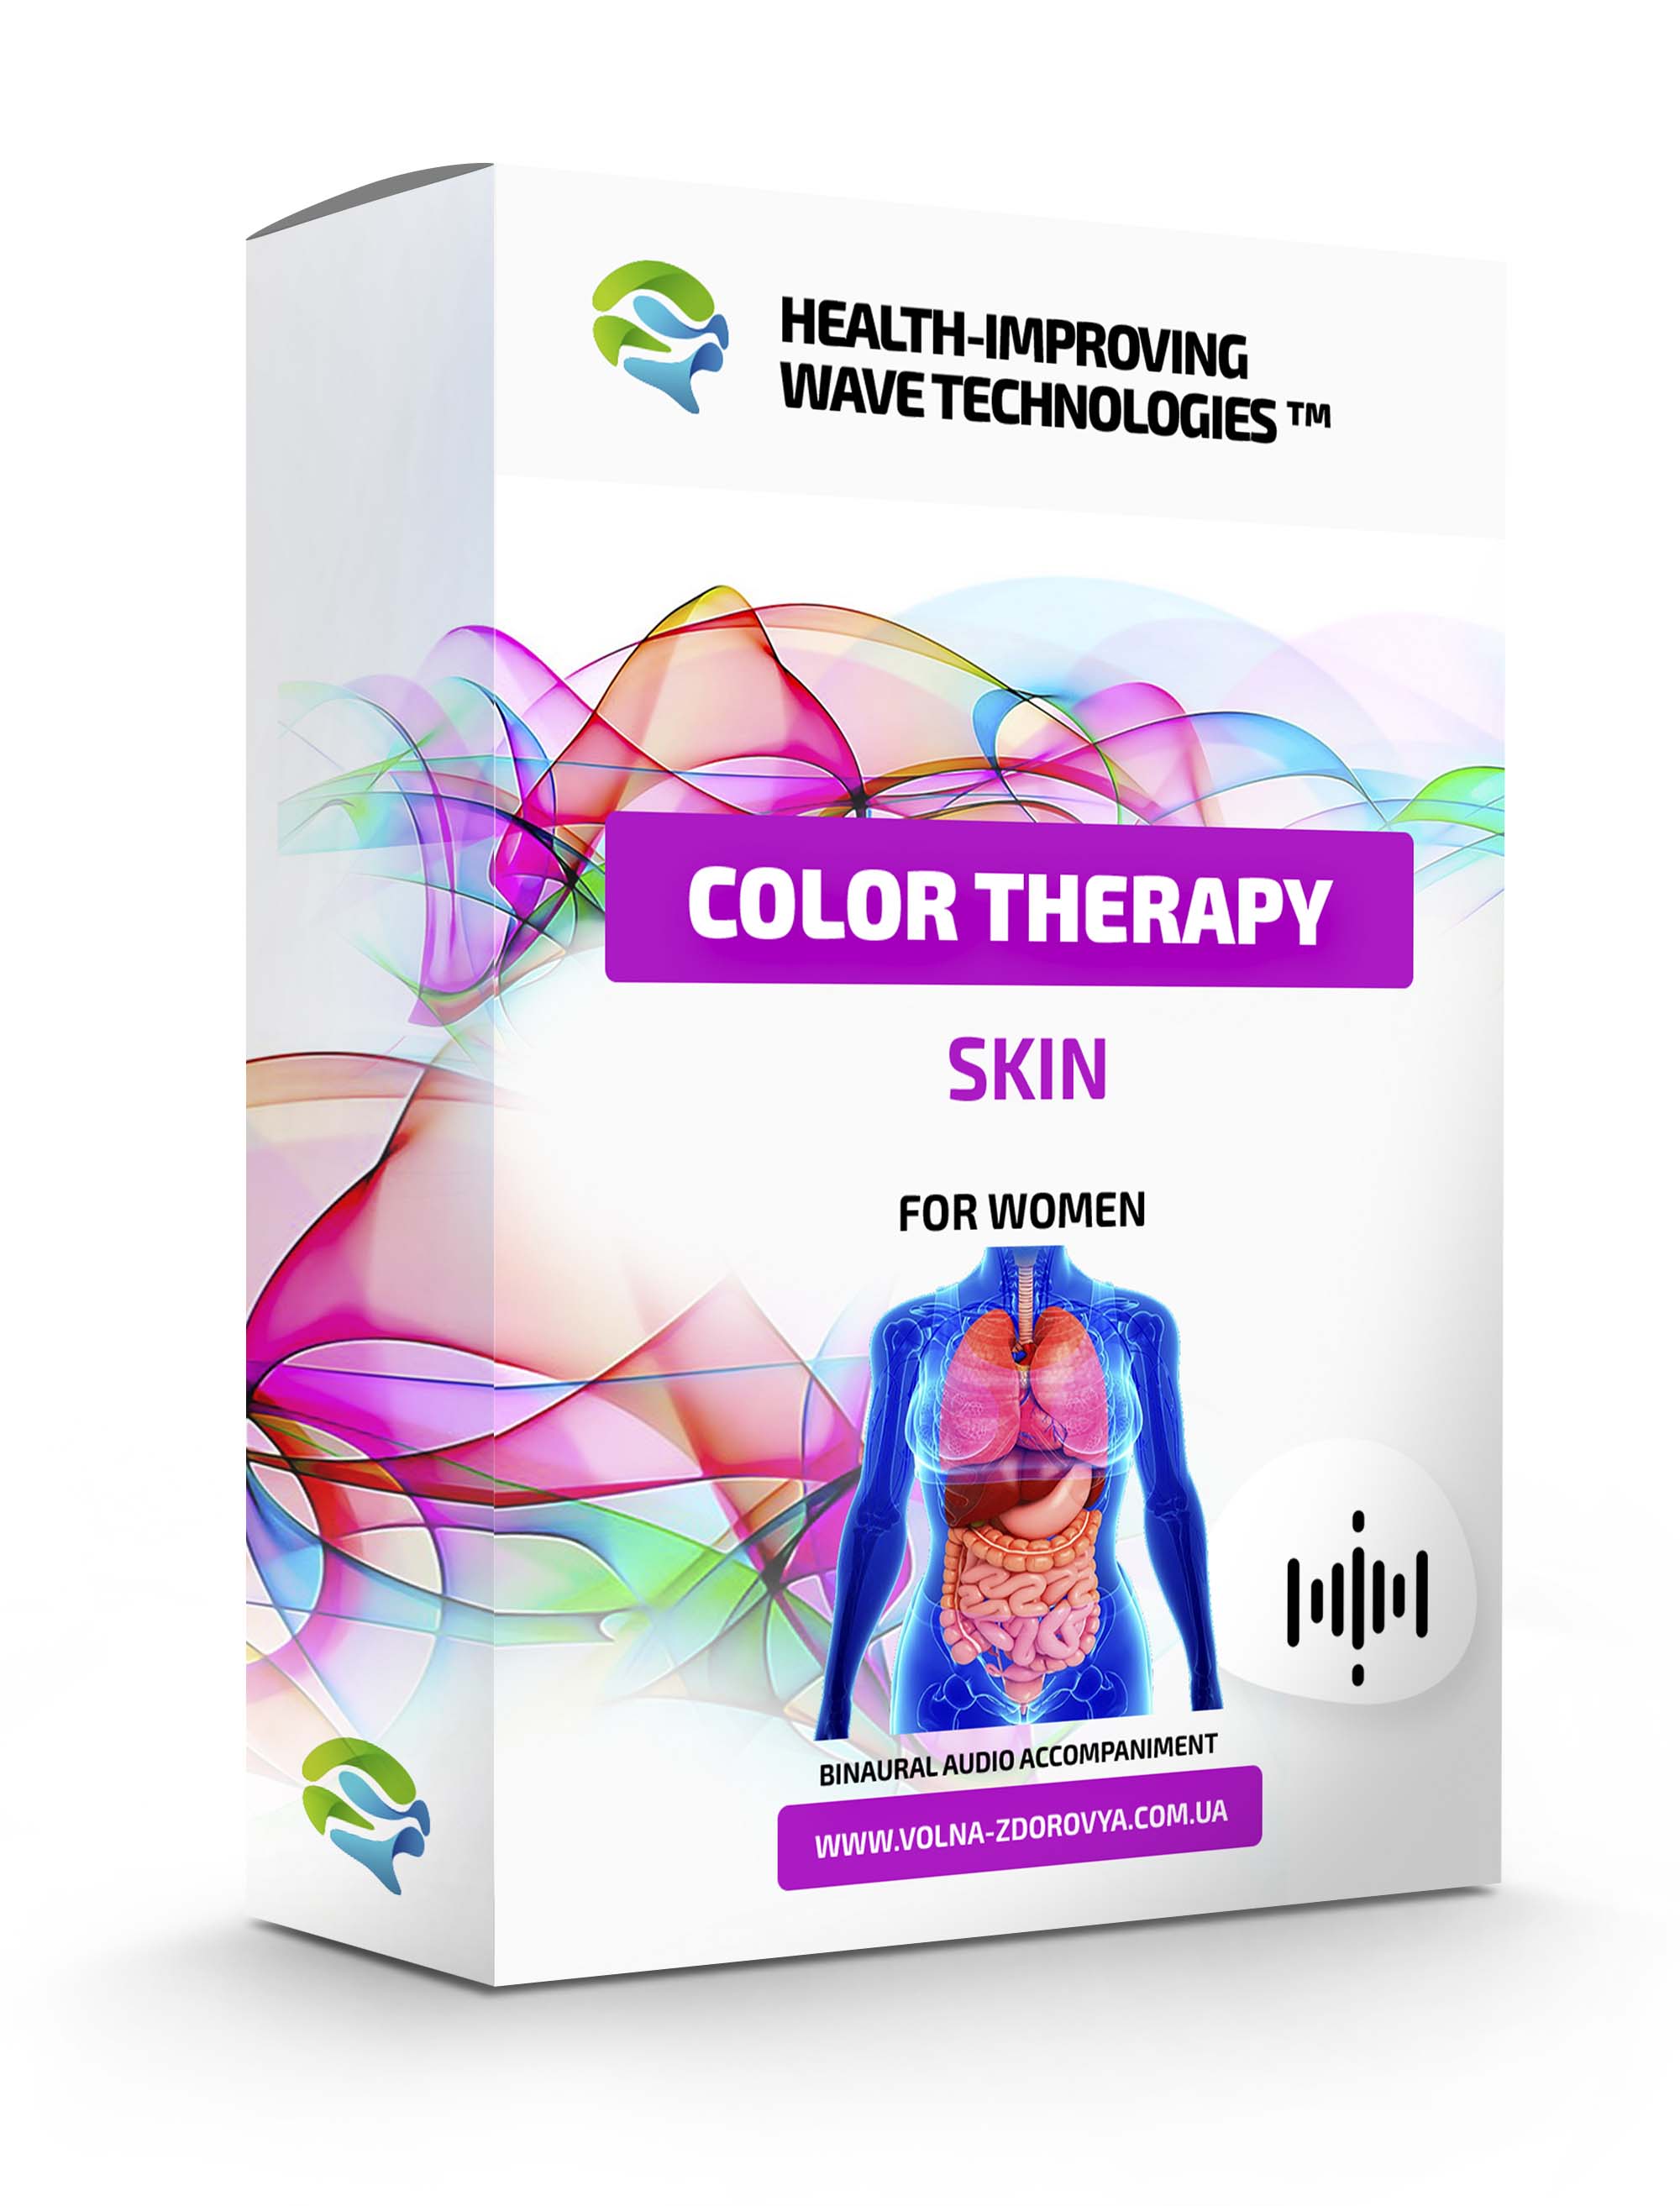 Сolor therapy - Skin. For women